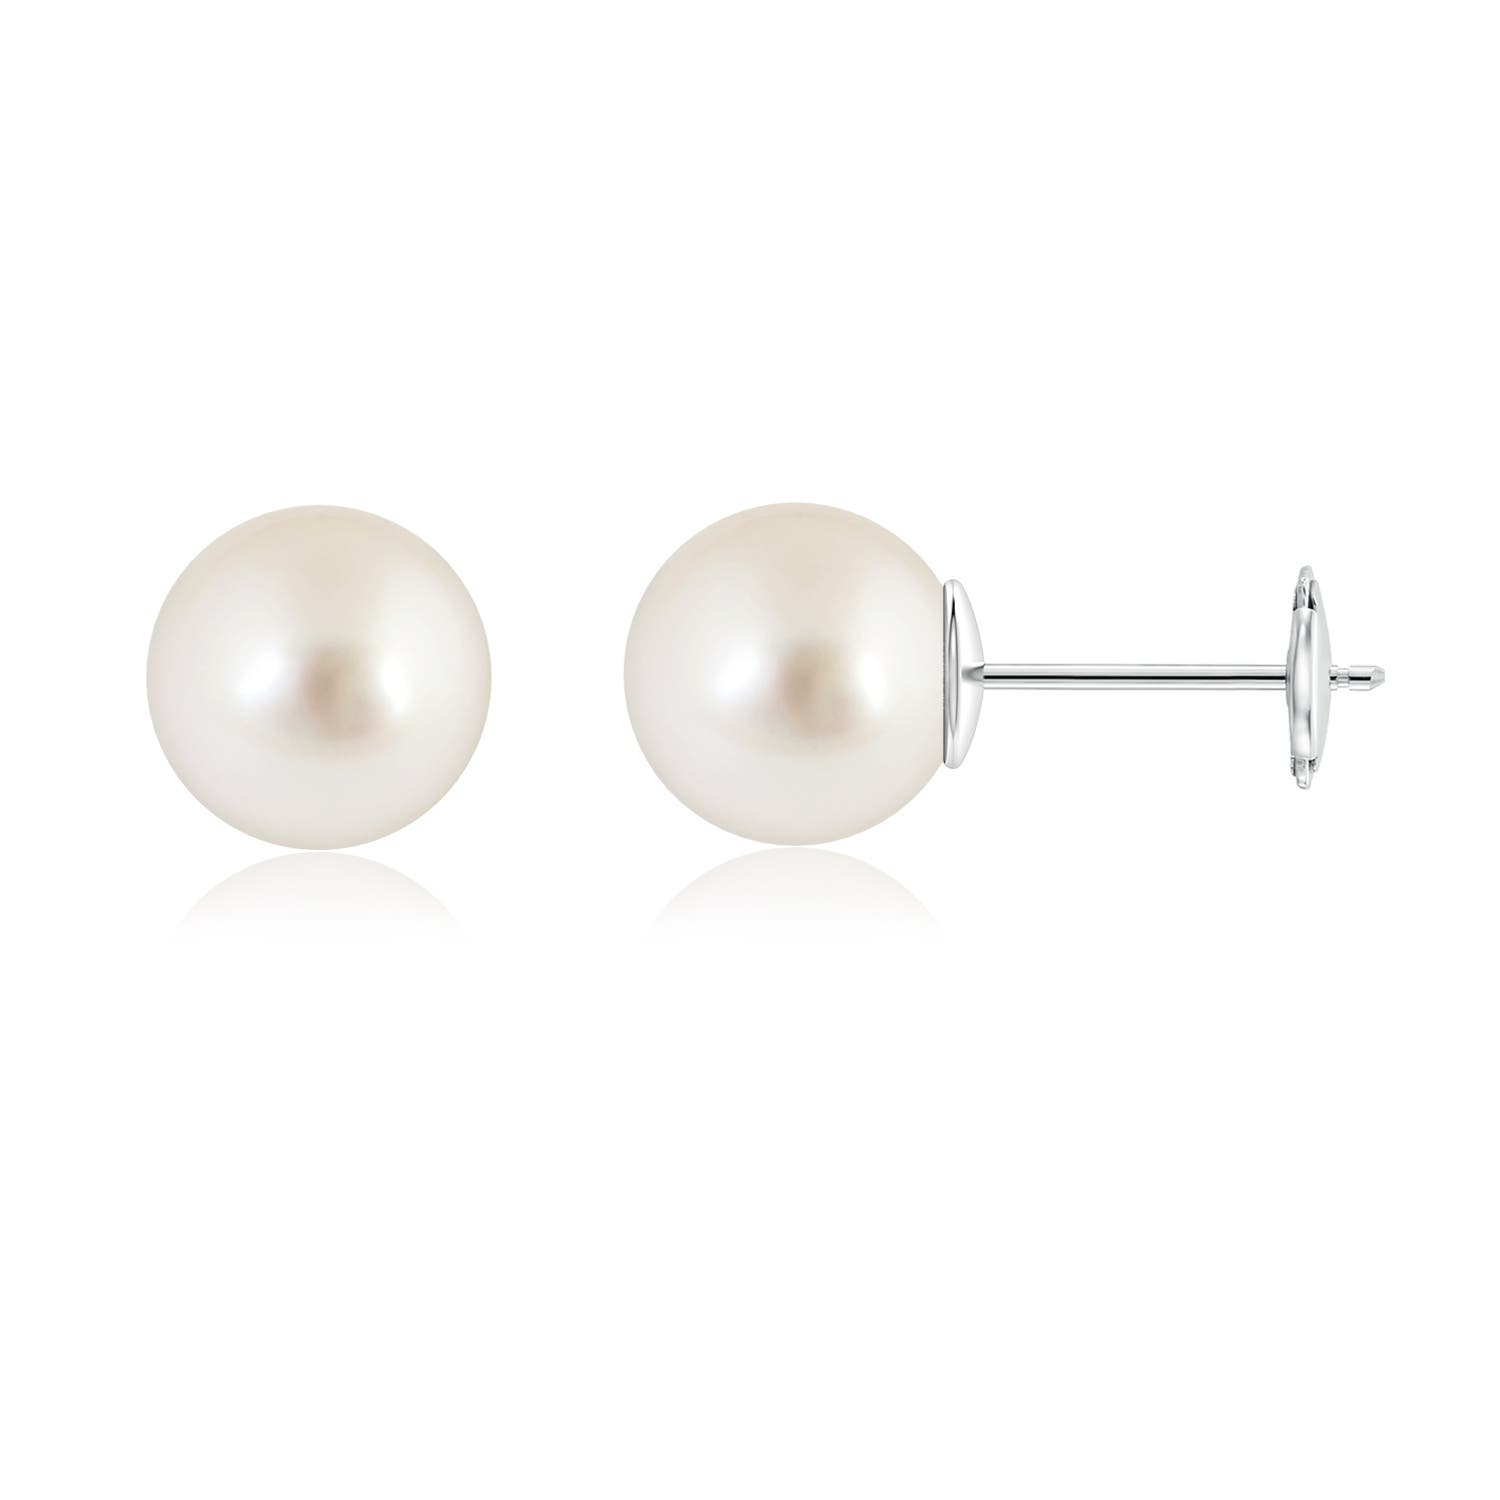 AAAA - South Sea Cultured Pearl / 14.4 CT / 14 KT White Gold